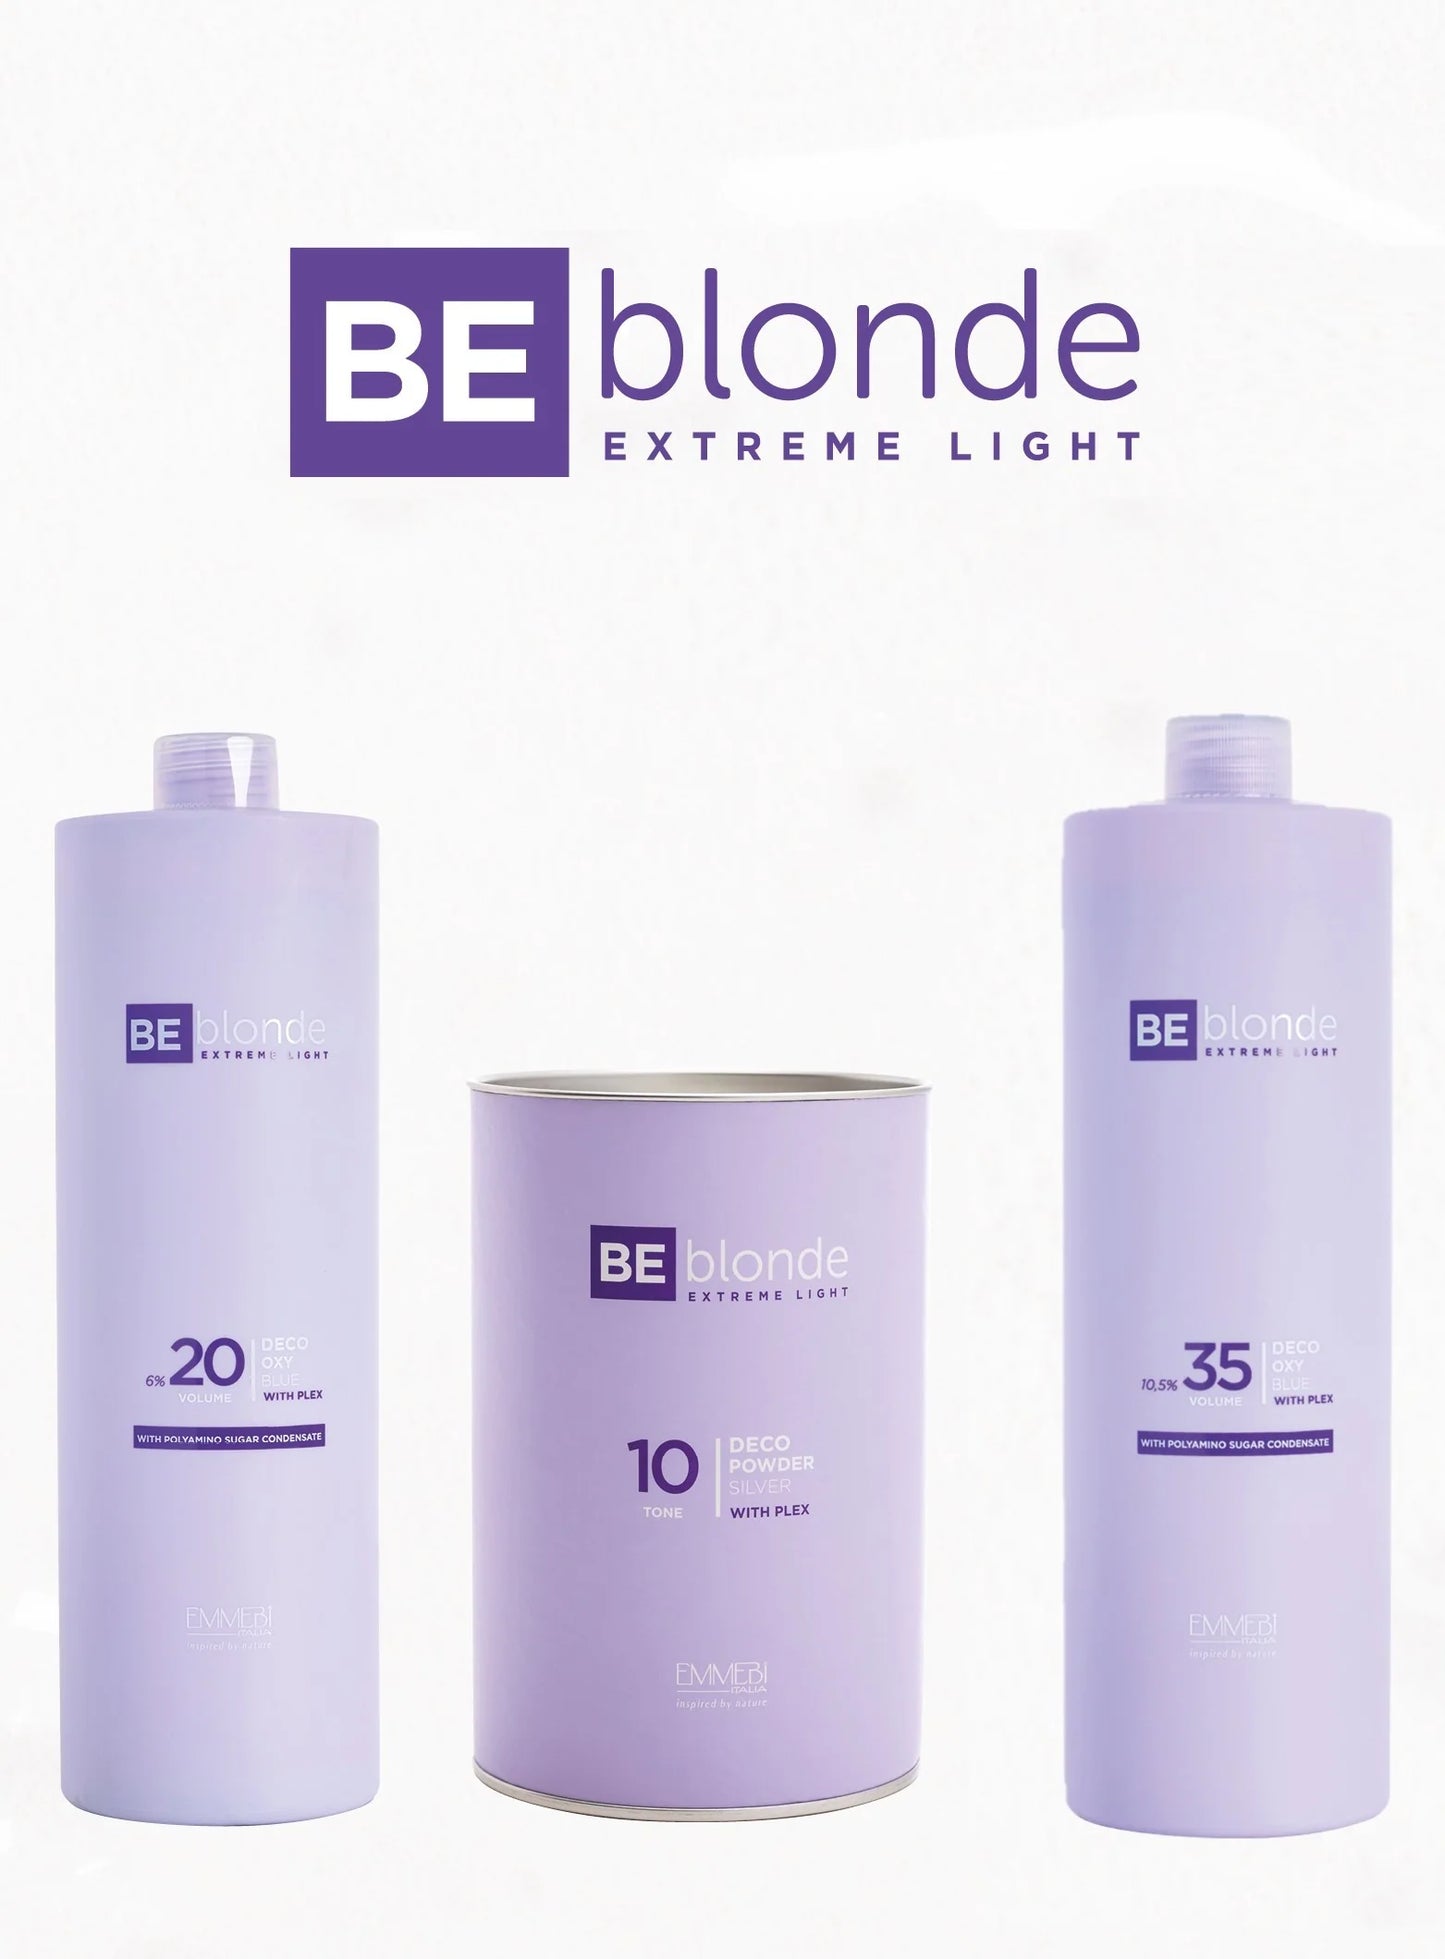 BE Blonde Extreme Light - INTRO DEAL